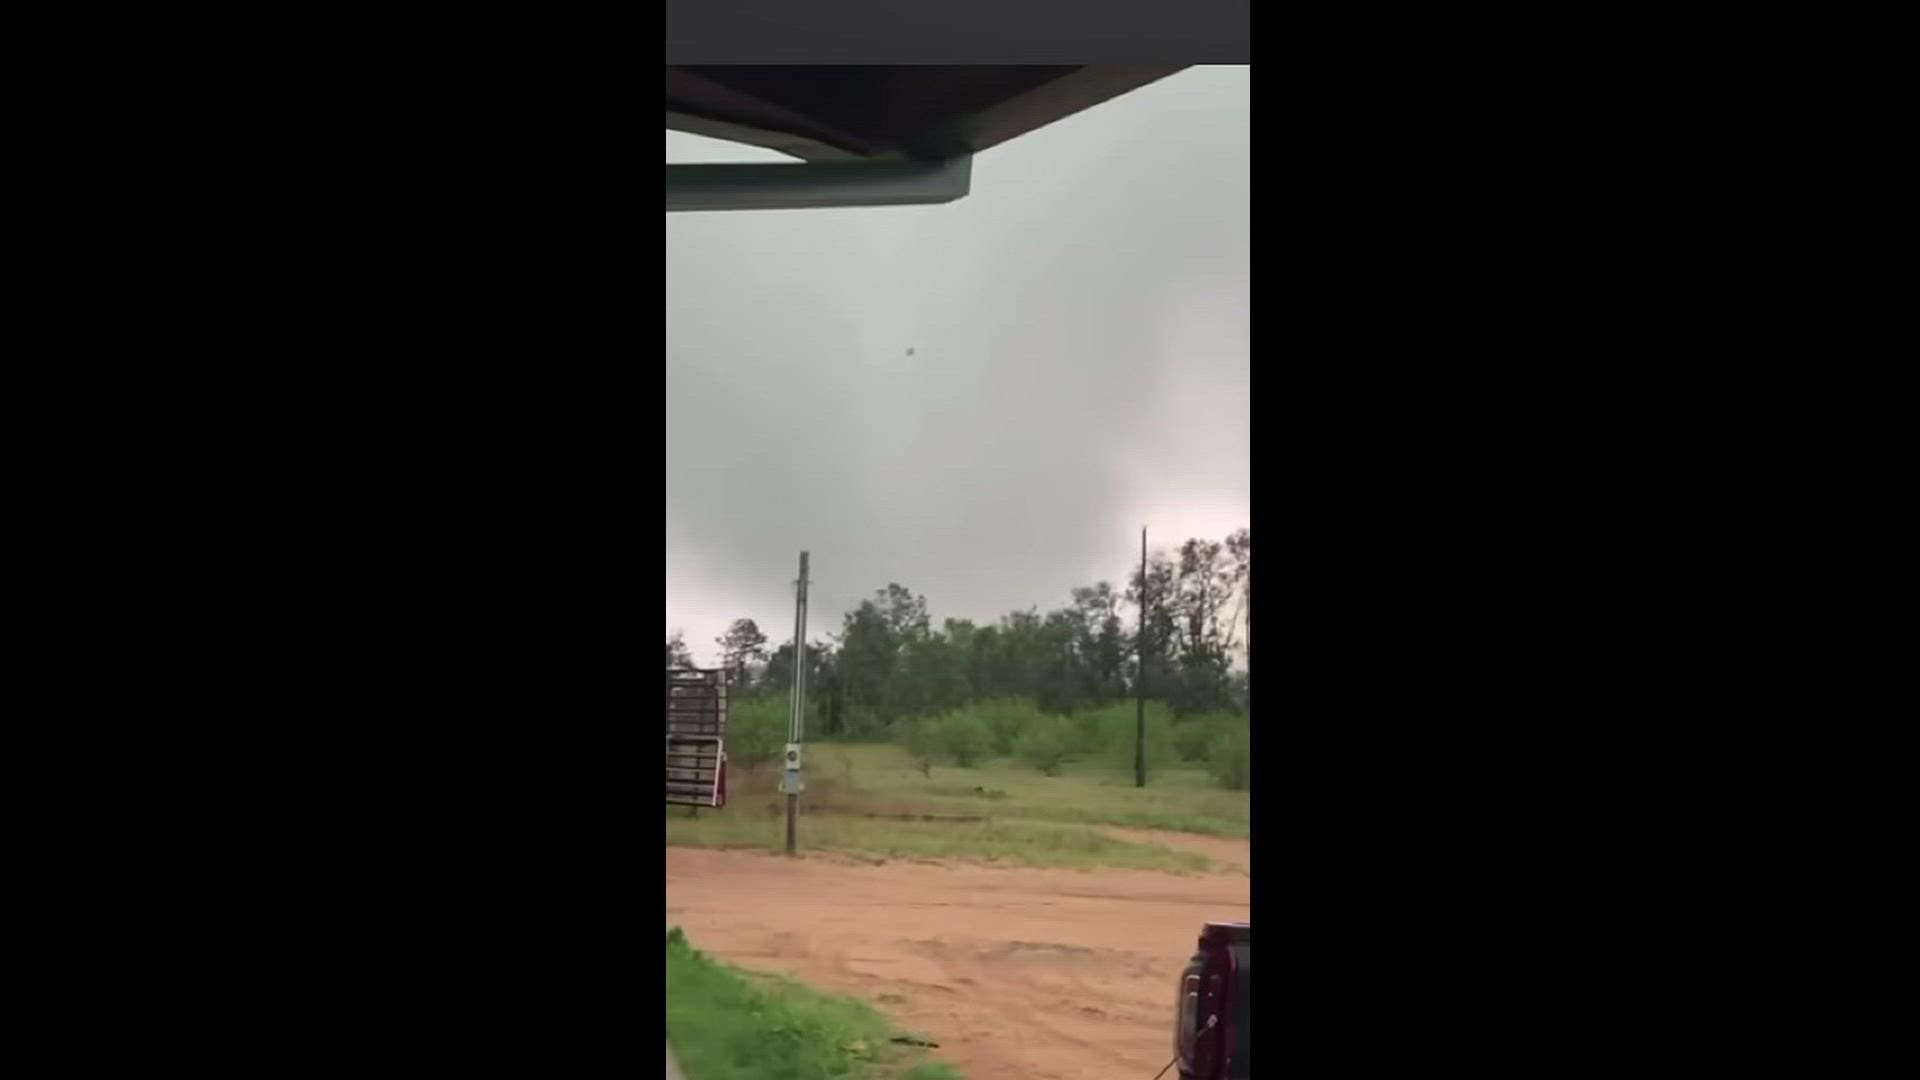 A tornado touched down Thursday, May 5, in Rusk County, Texas.